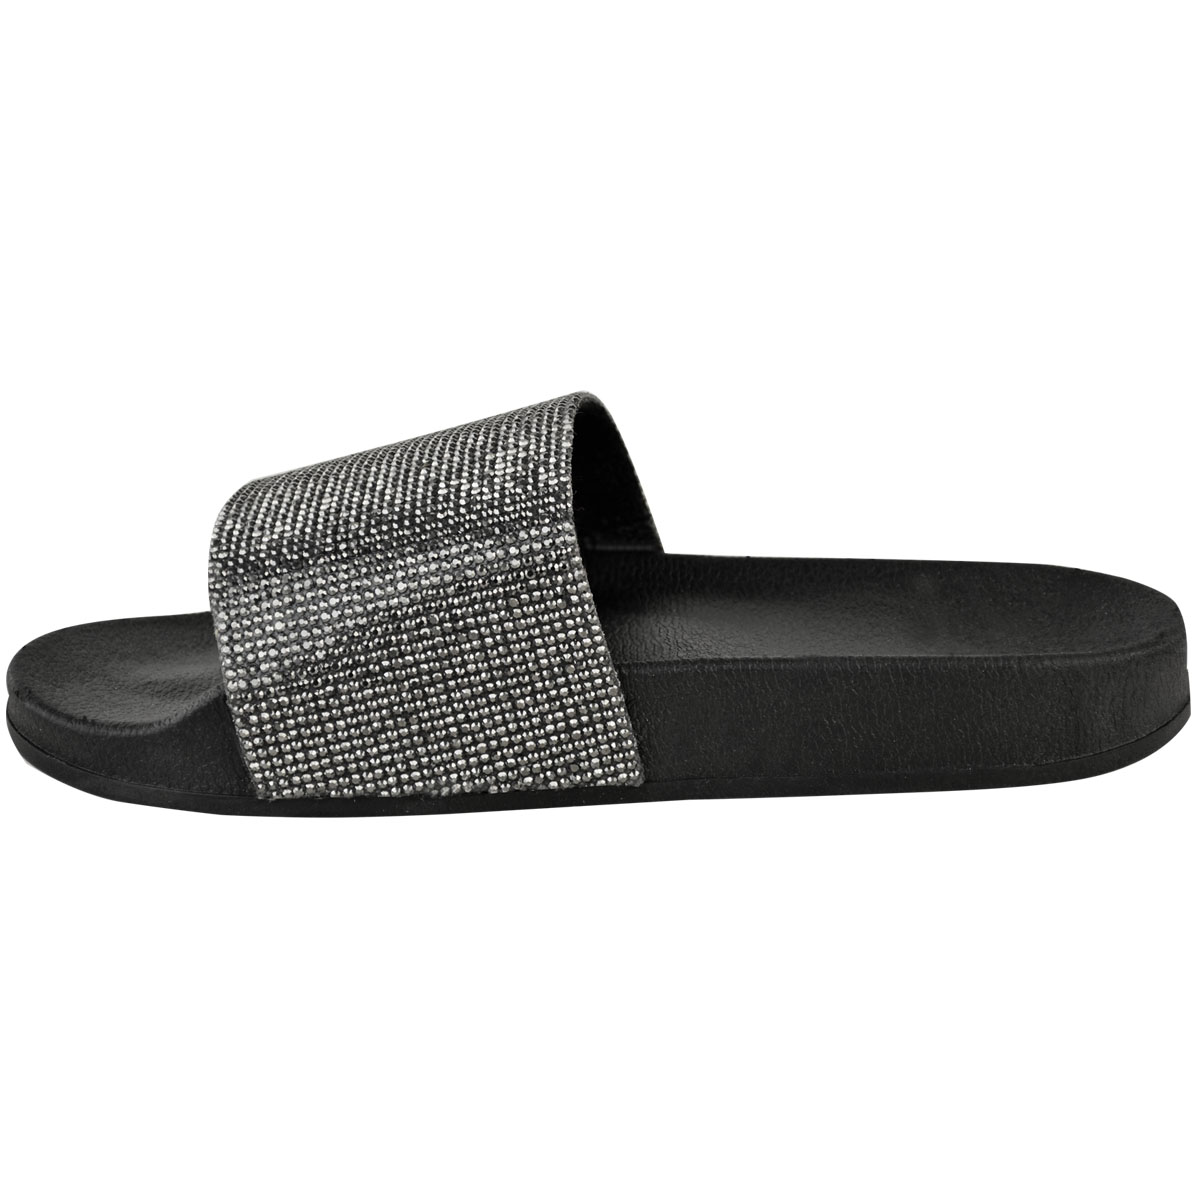 sparkly slip on shoes